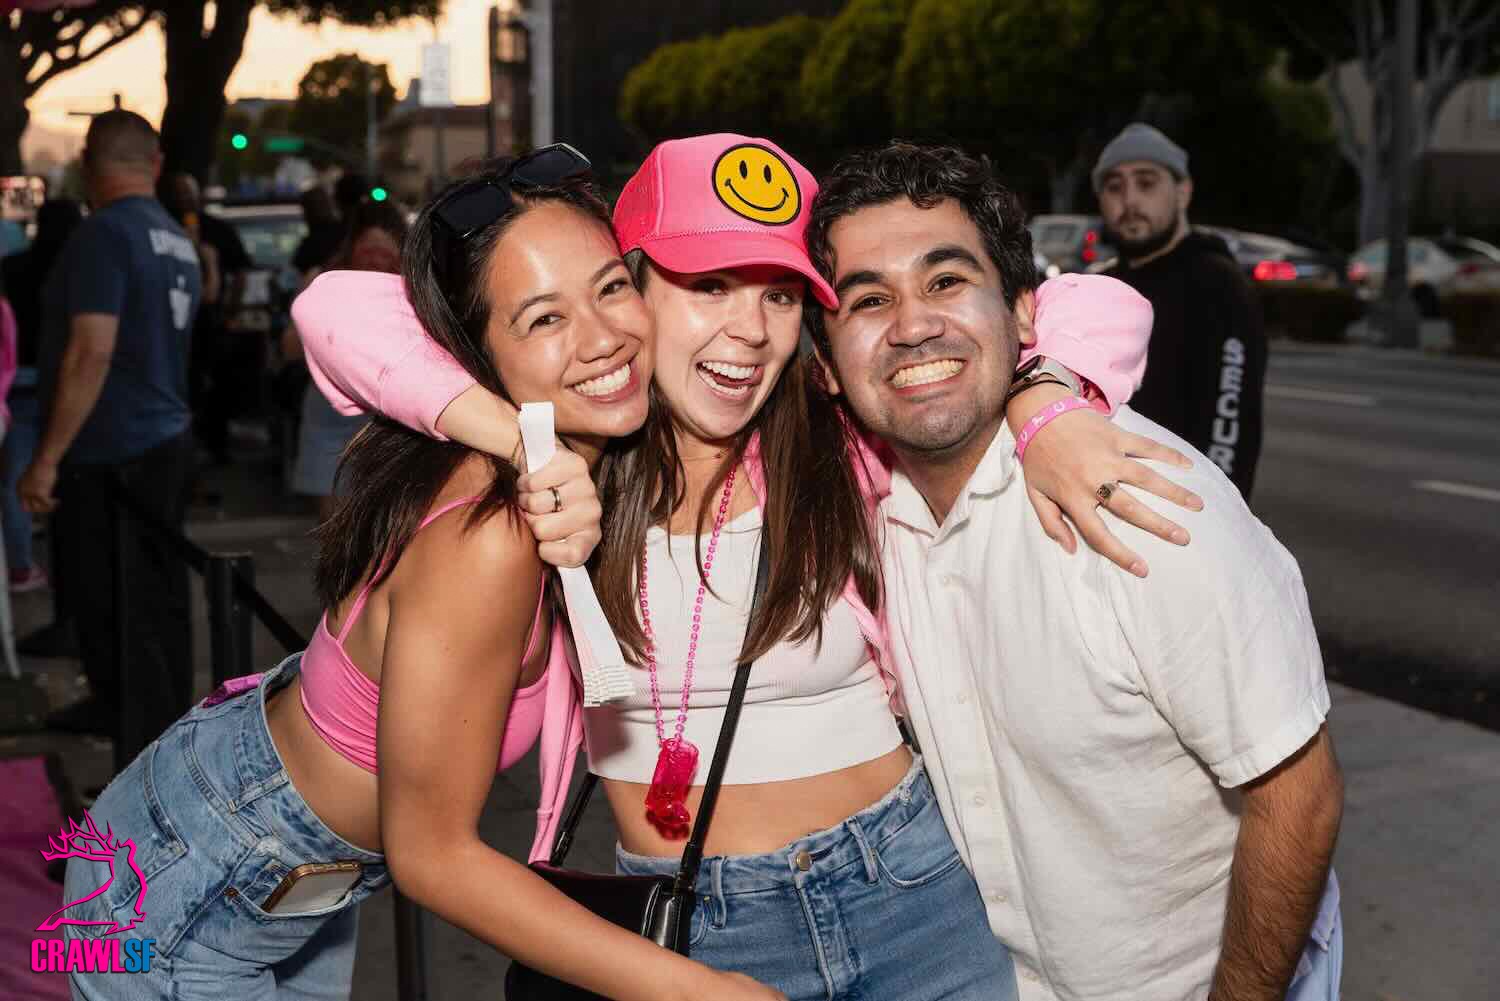 Photos from the Barbie Pub Crawl in San Francisco